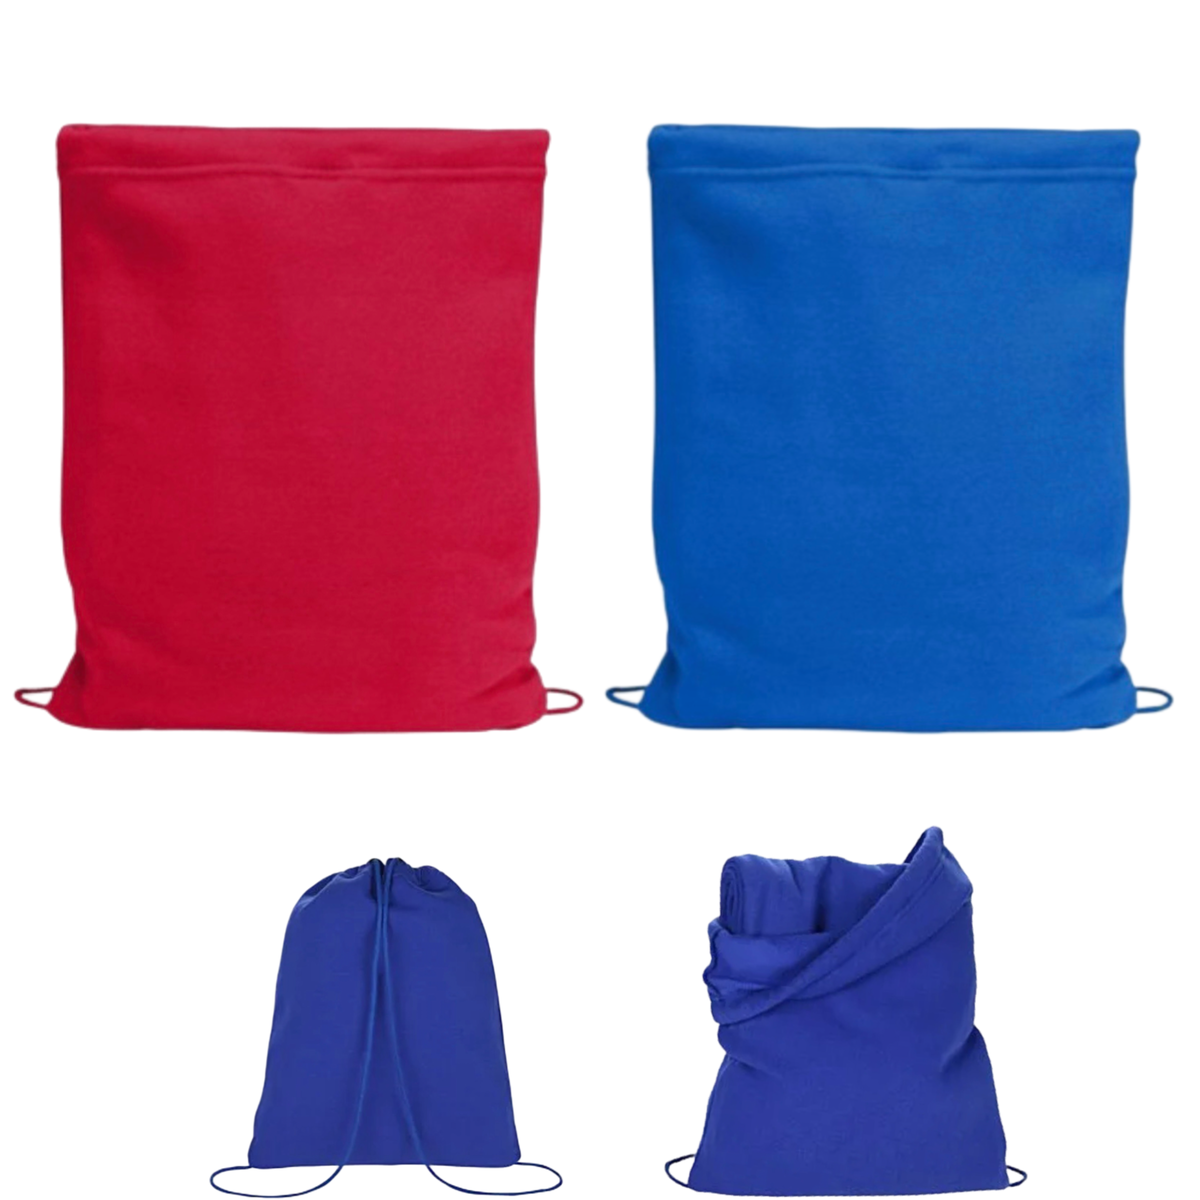 48″ x 52″ Fleece Blanket With Attached Drawstring Backpack For Travel